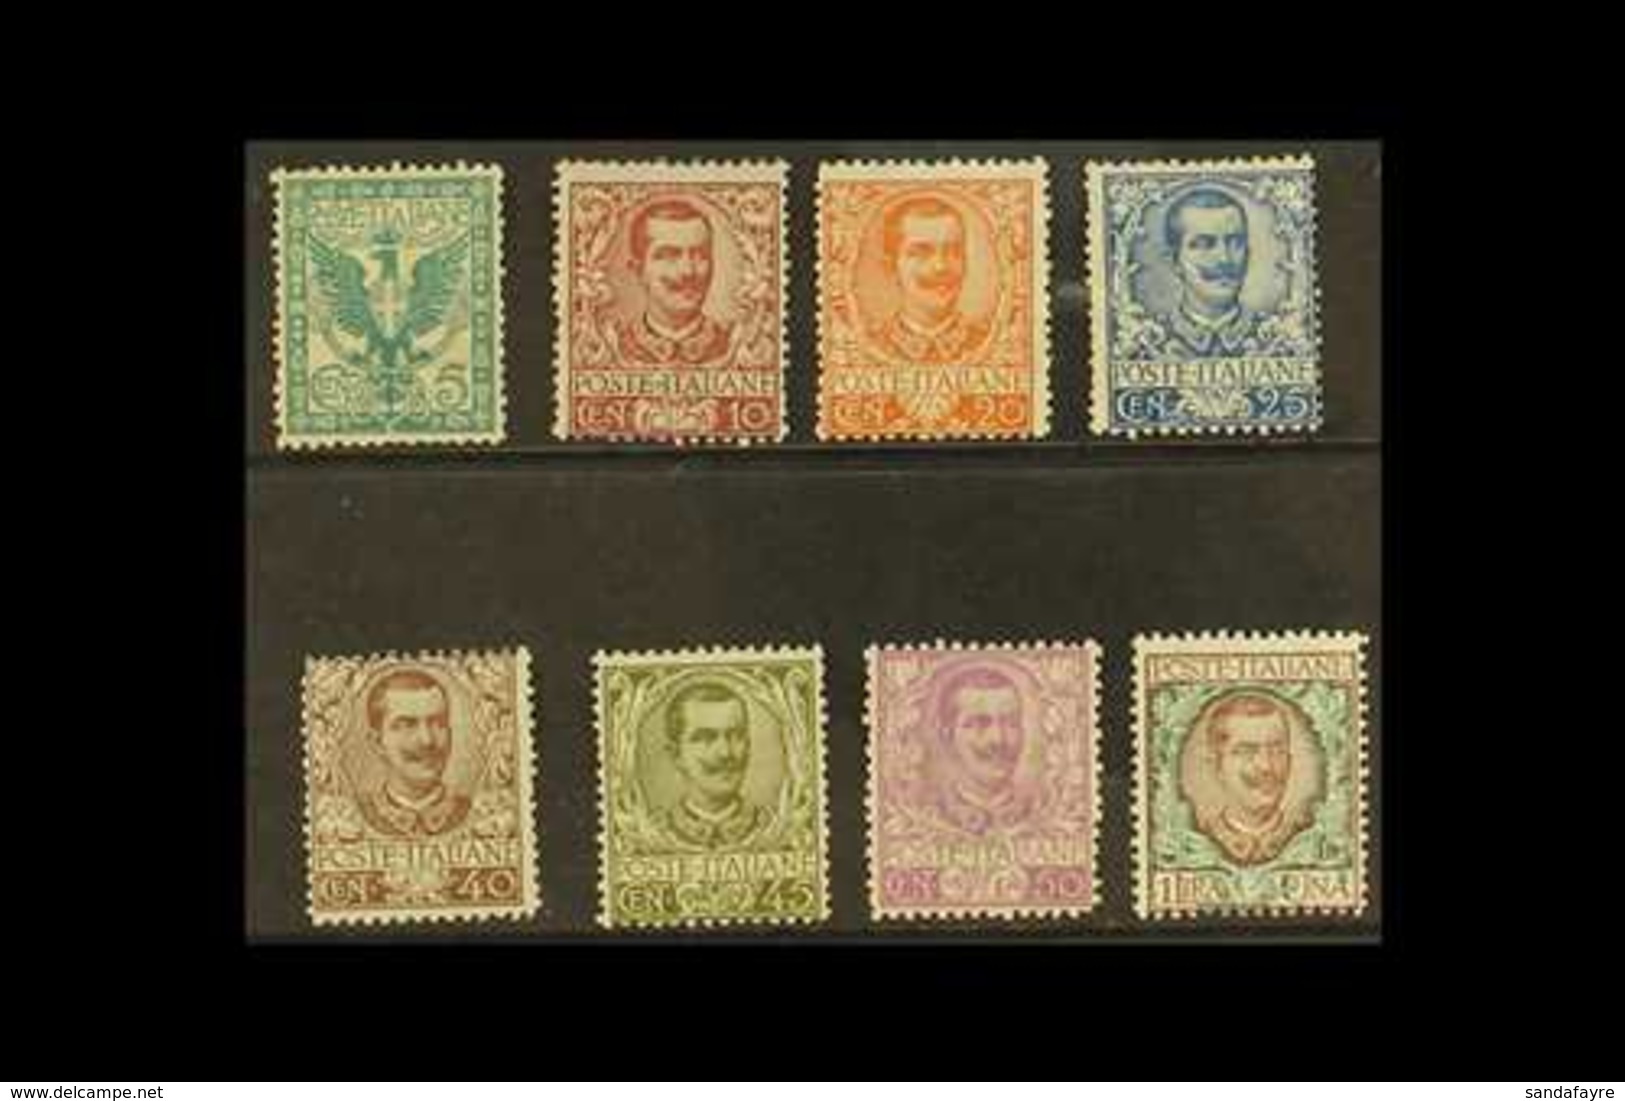 1901 5c To 1L Definitives, Sassone 70/7, Mi 76/83, Odd Minor Perf Fault, Otherwise Fine Mint (8 Stamps). For More Images - Sin Clasificación